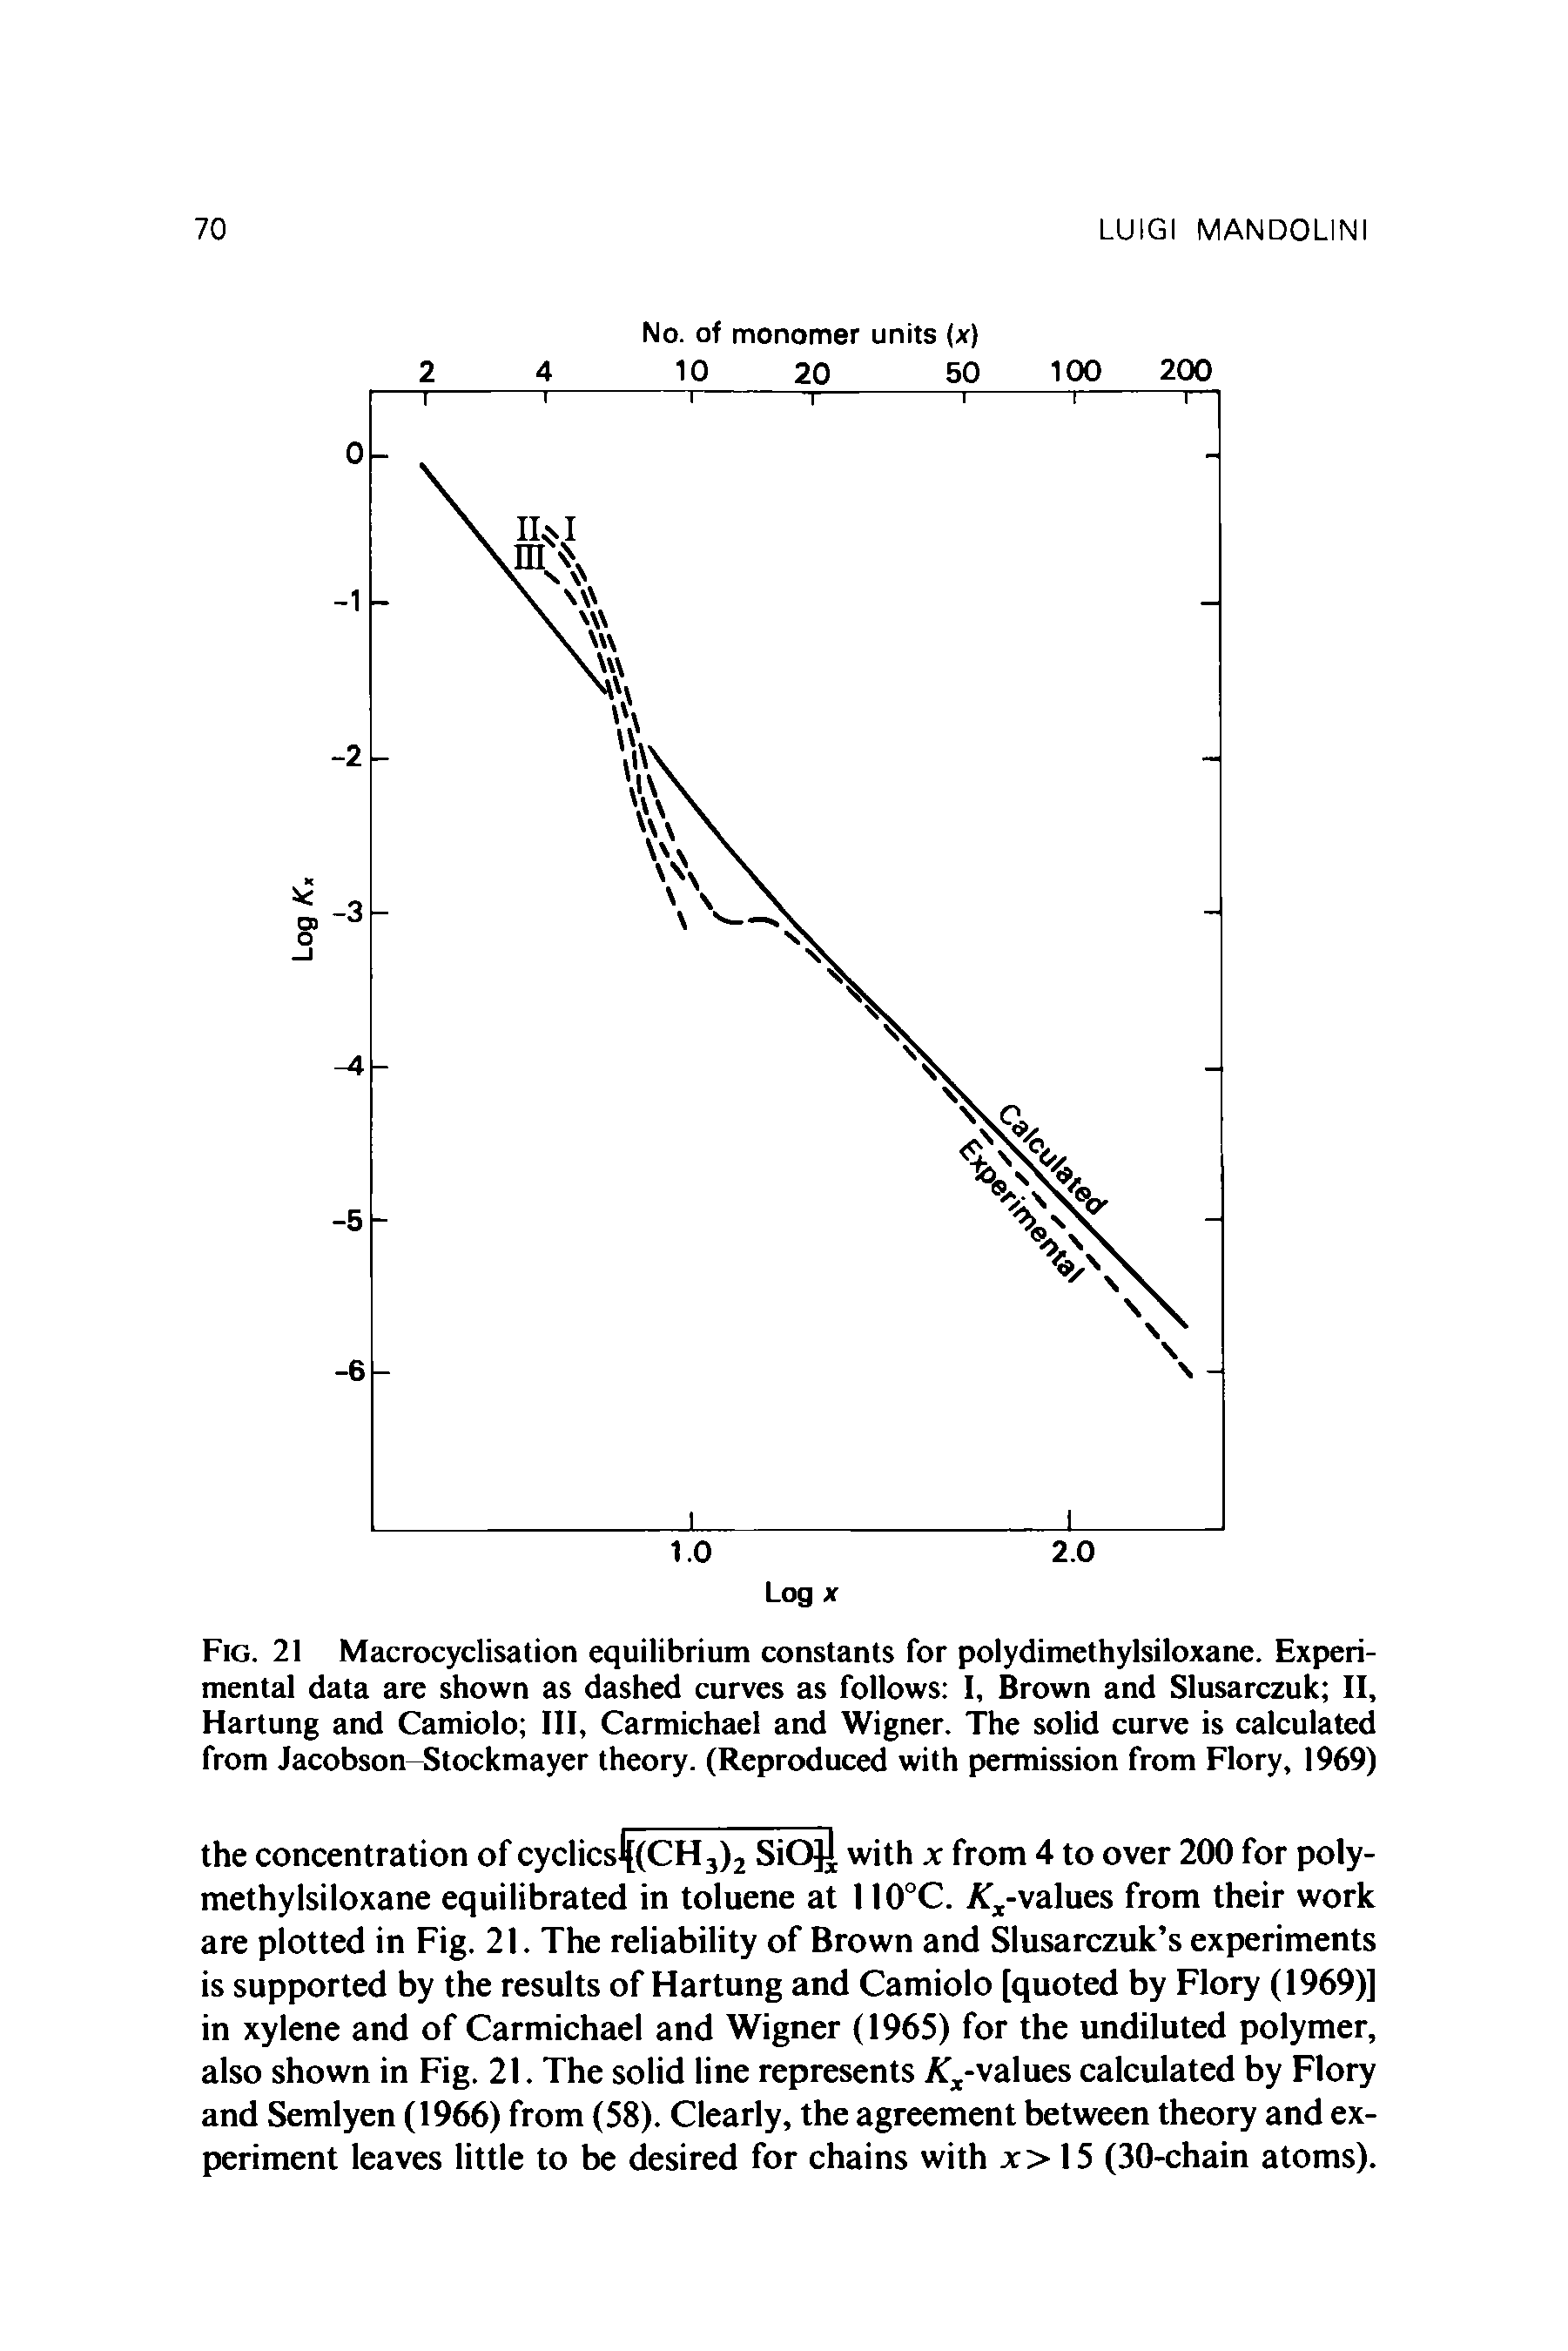 Fig. 21 Macrocyclisation equilibrium constants for polydimethylsiloxane. Experimental data are shown as dashed curves as follows I, Brown and Slusarczuk II, Hartung and Camiolo III, Carmichael and Wigner. The solid curve is calculated from Jacobson Stockmayer theory. (Reproduced with permission from Flory, 1969)...